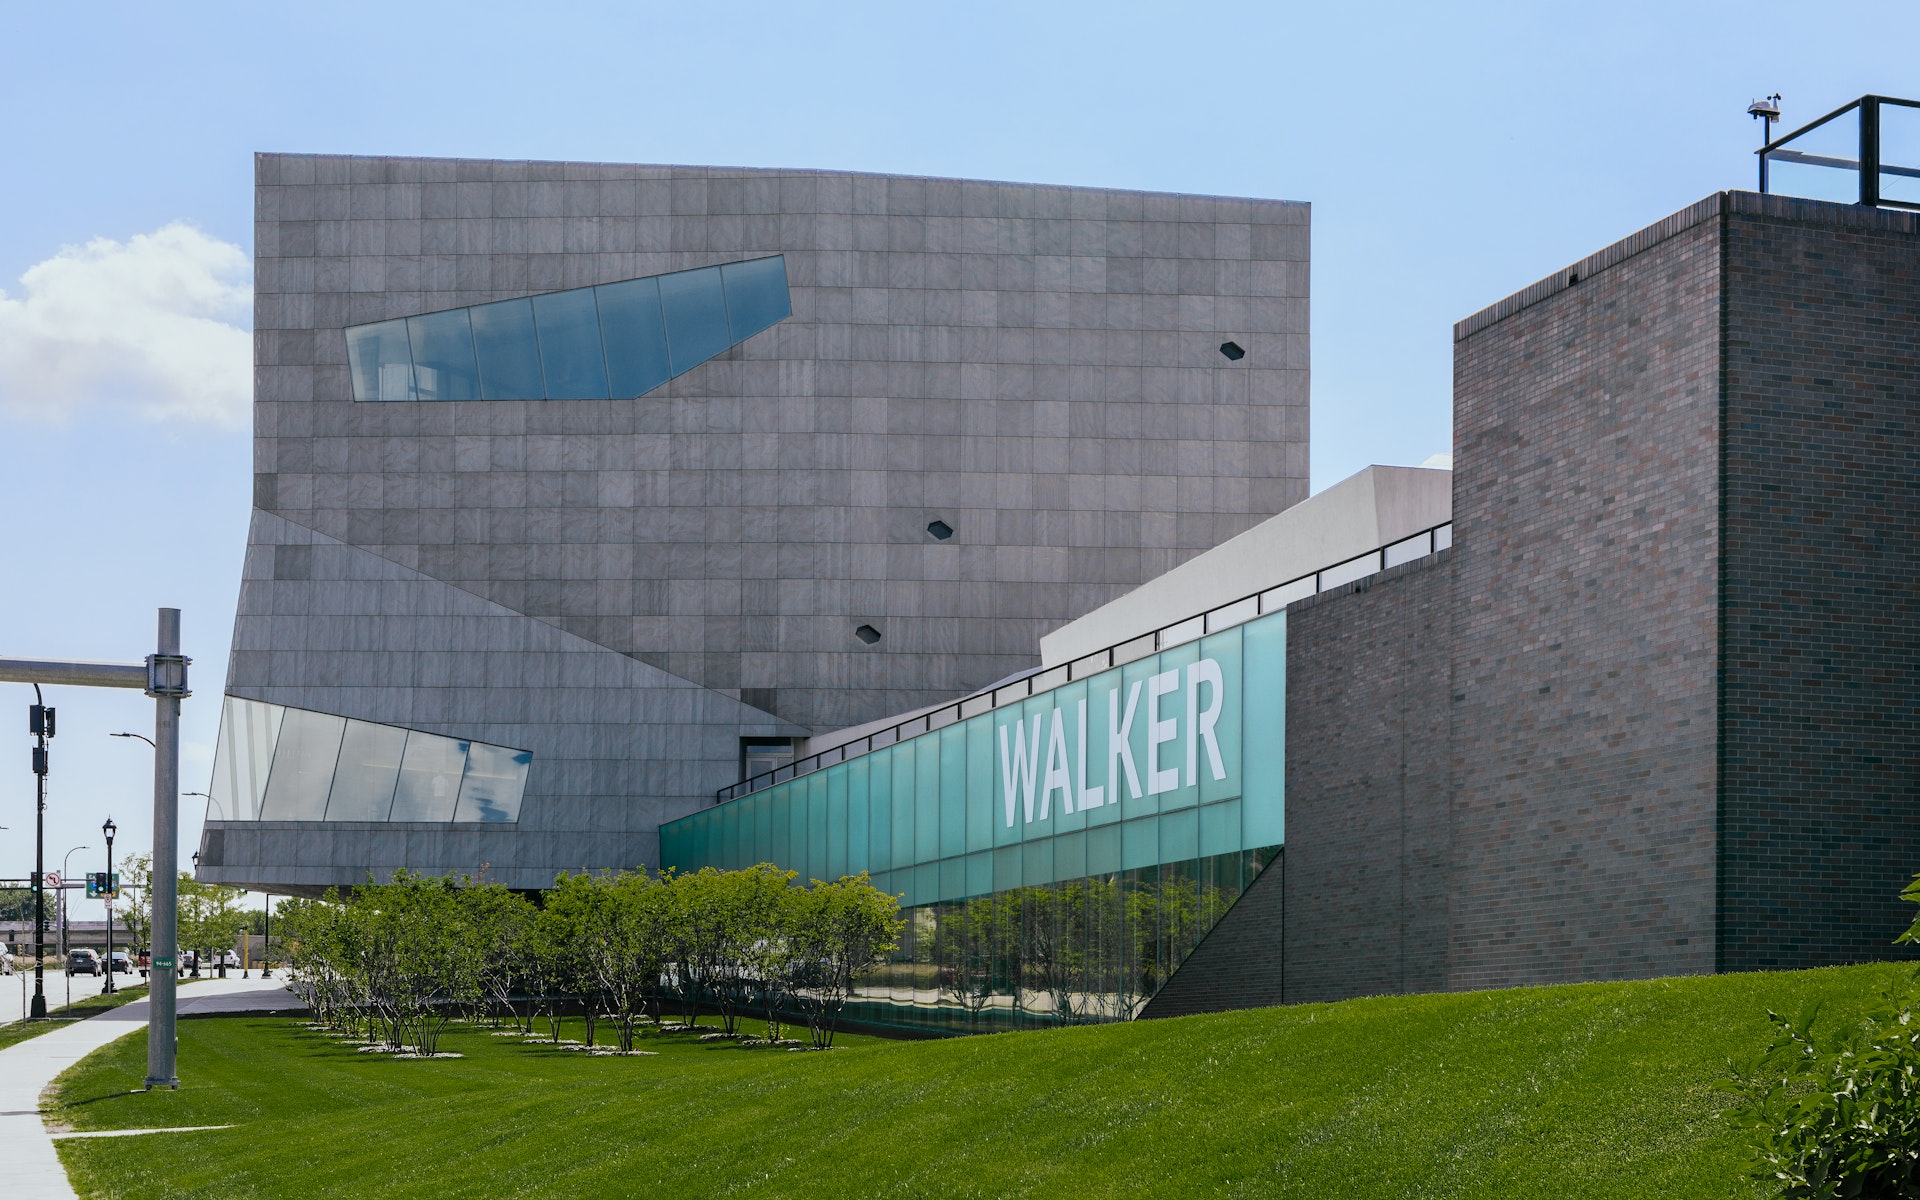 View of the Walker Art Center Campus from Hennepin Avenue, including the Herzog and de Meuron expansion theater bloc and a partial view of the brick Barnes Buidling at right. Also shown, small grove of trees outside Hennepin Lounge, and large WALKER letters on glass wall.